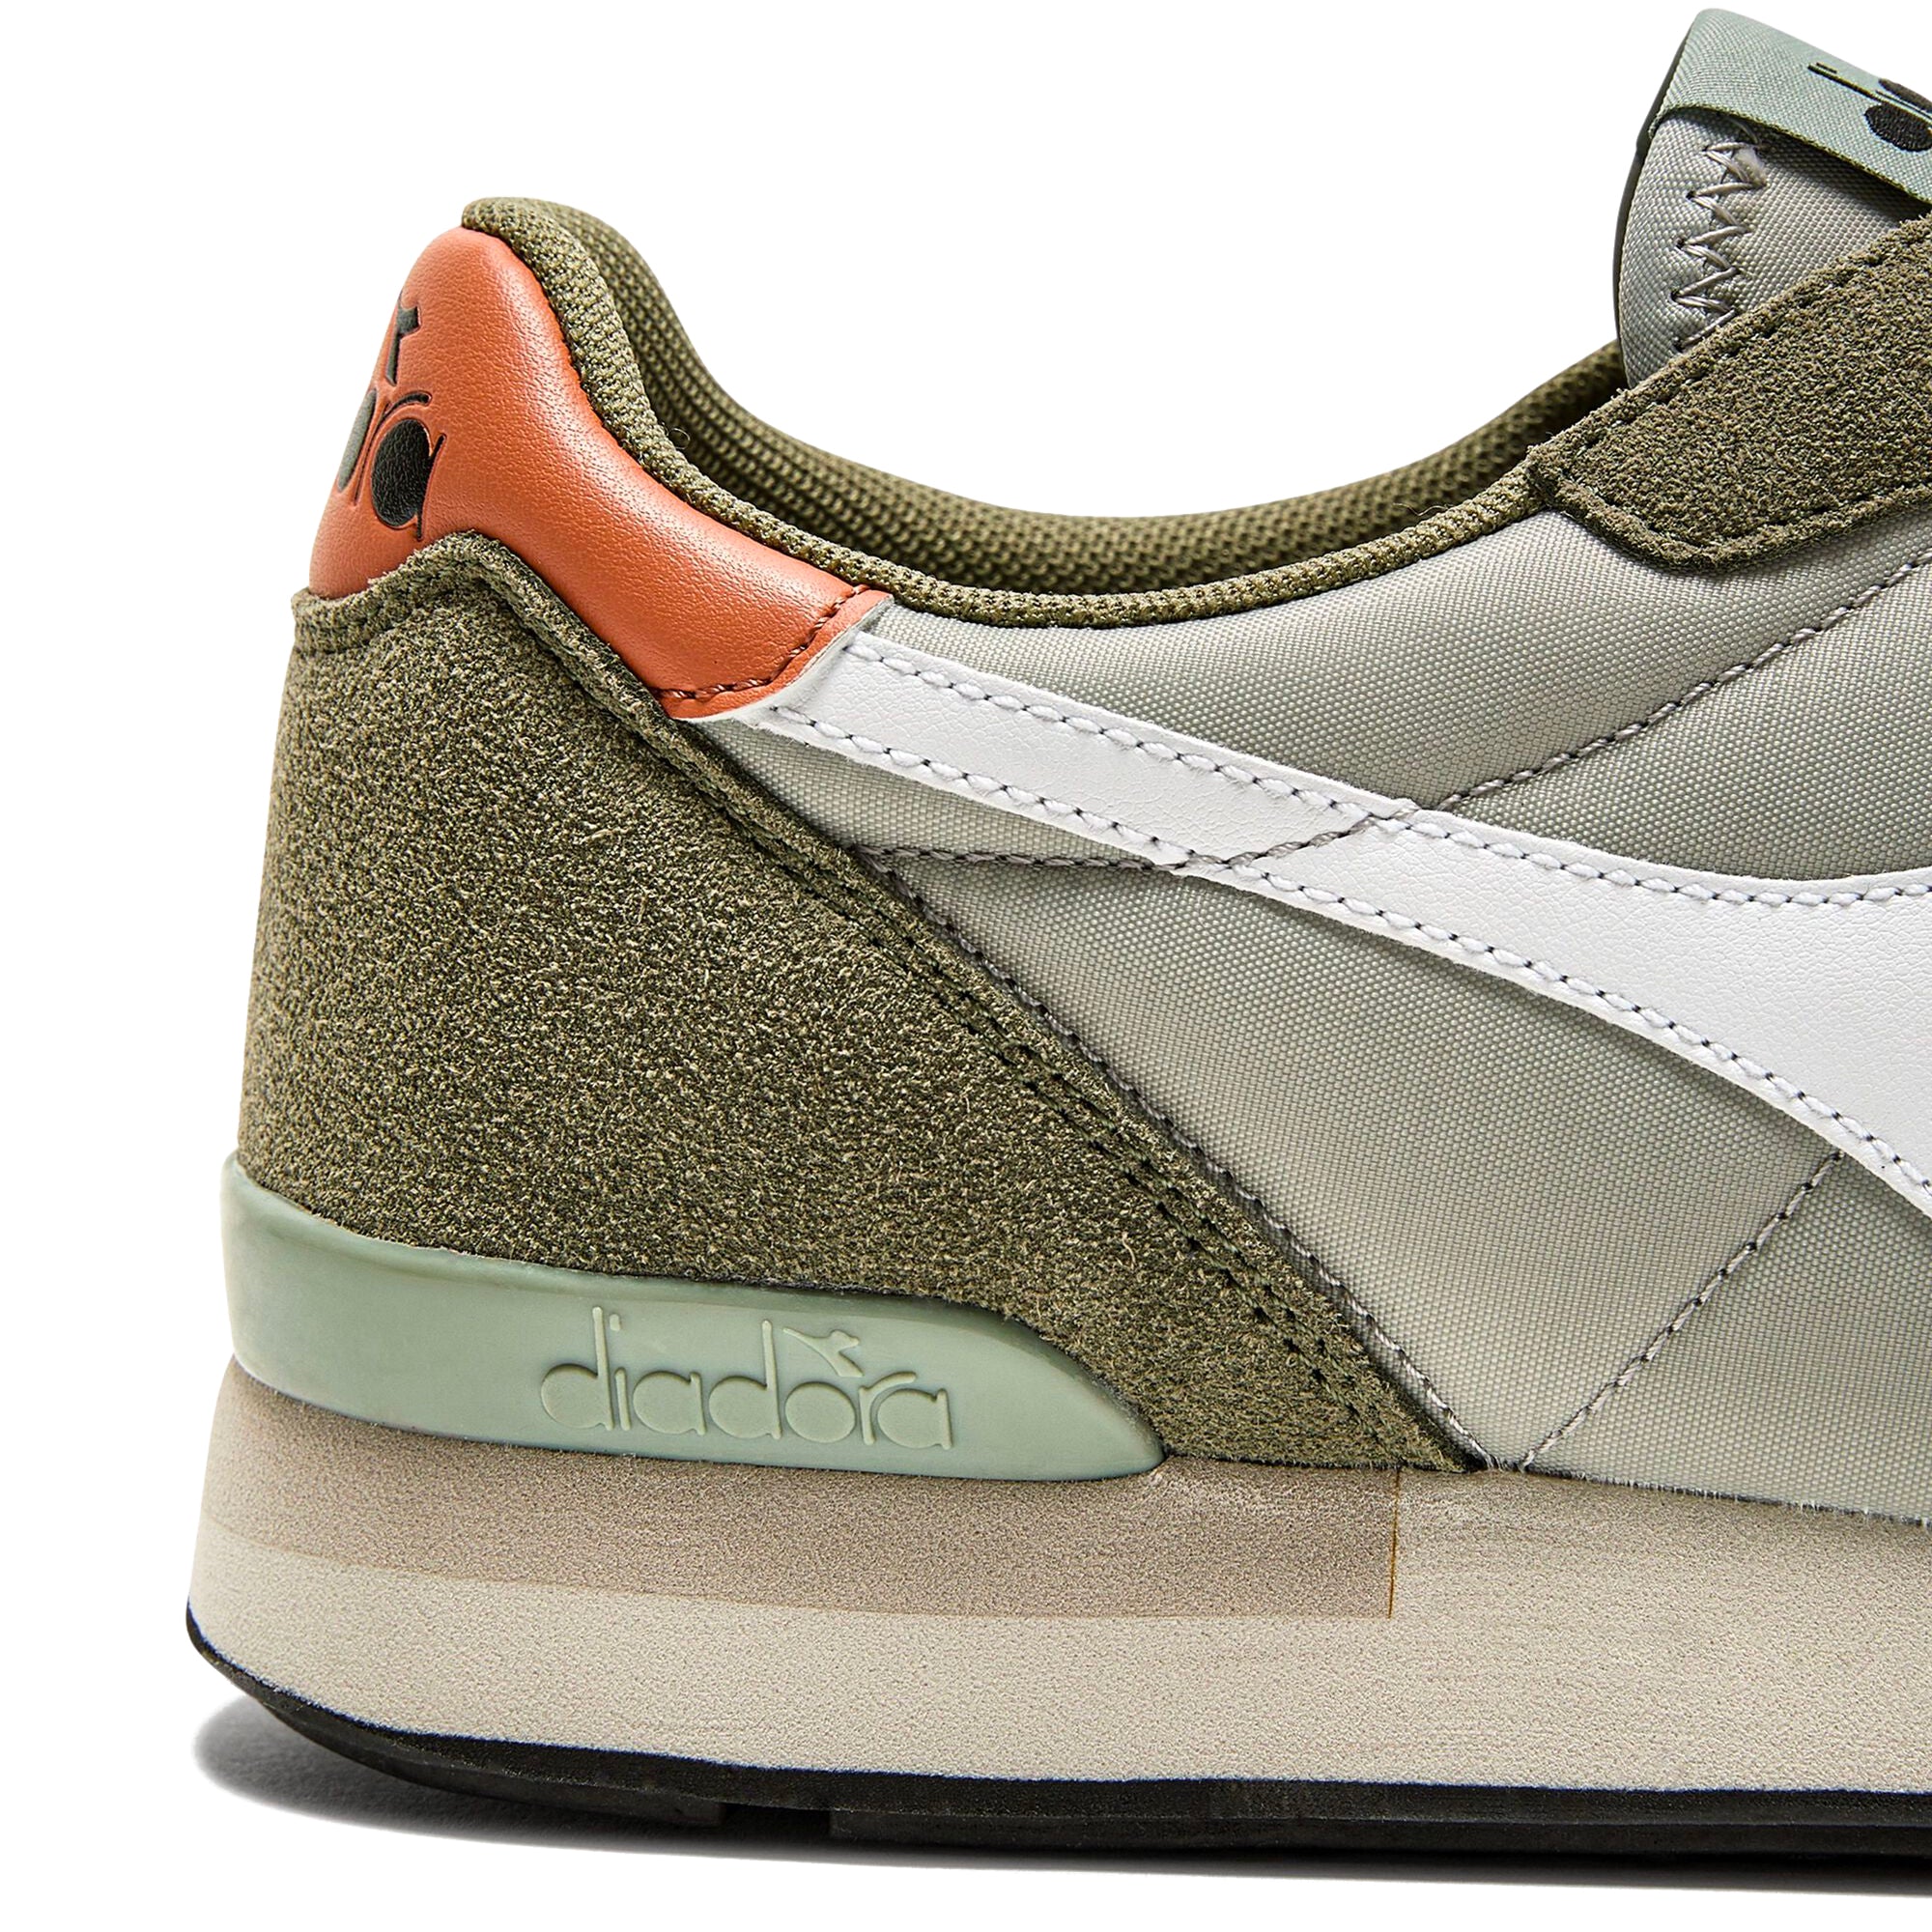 Diadora Camaro Trainers - Vetiver / Pussywillow Grey